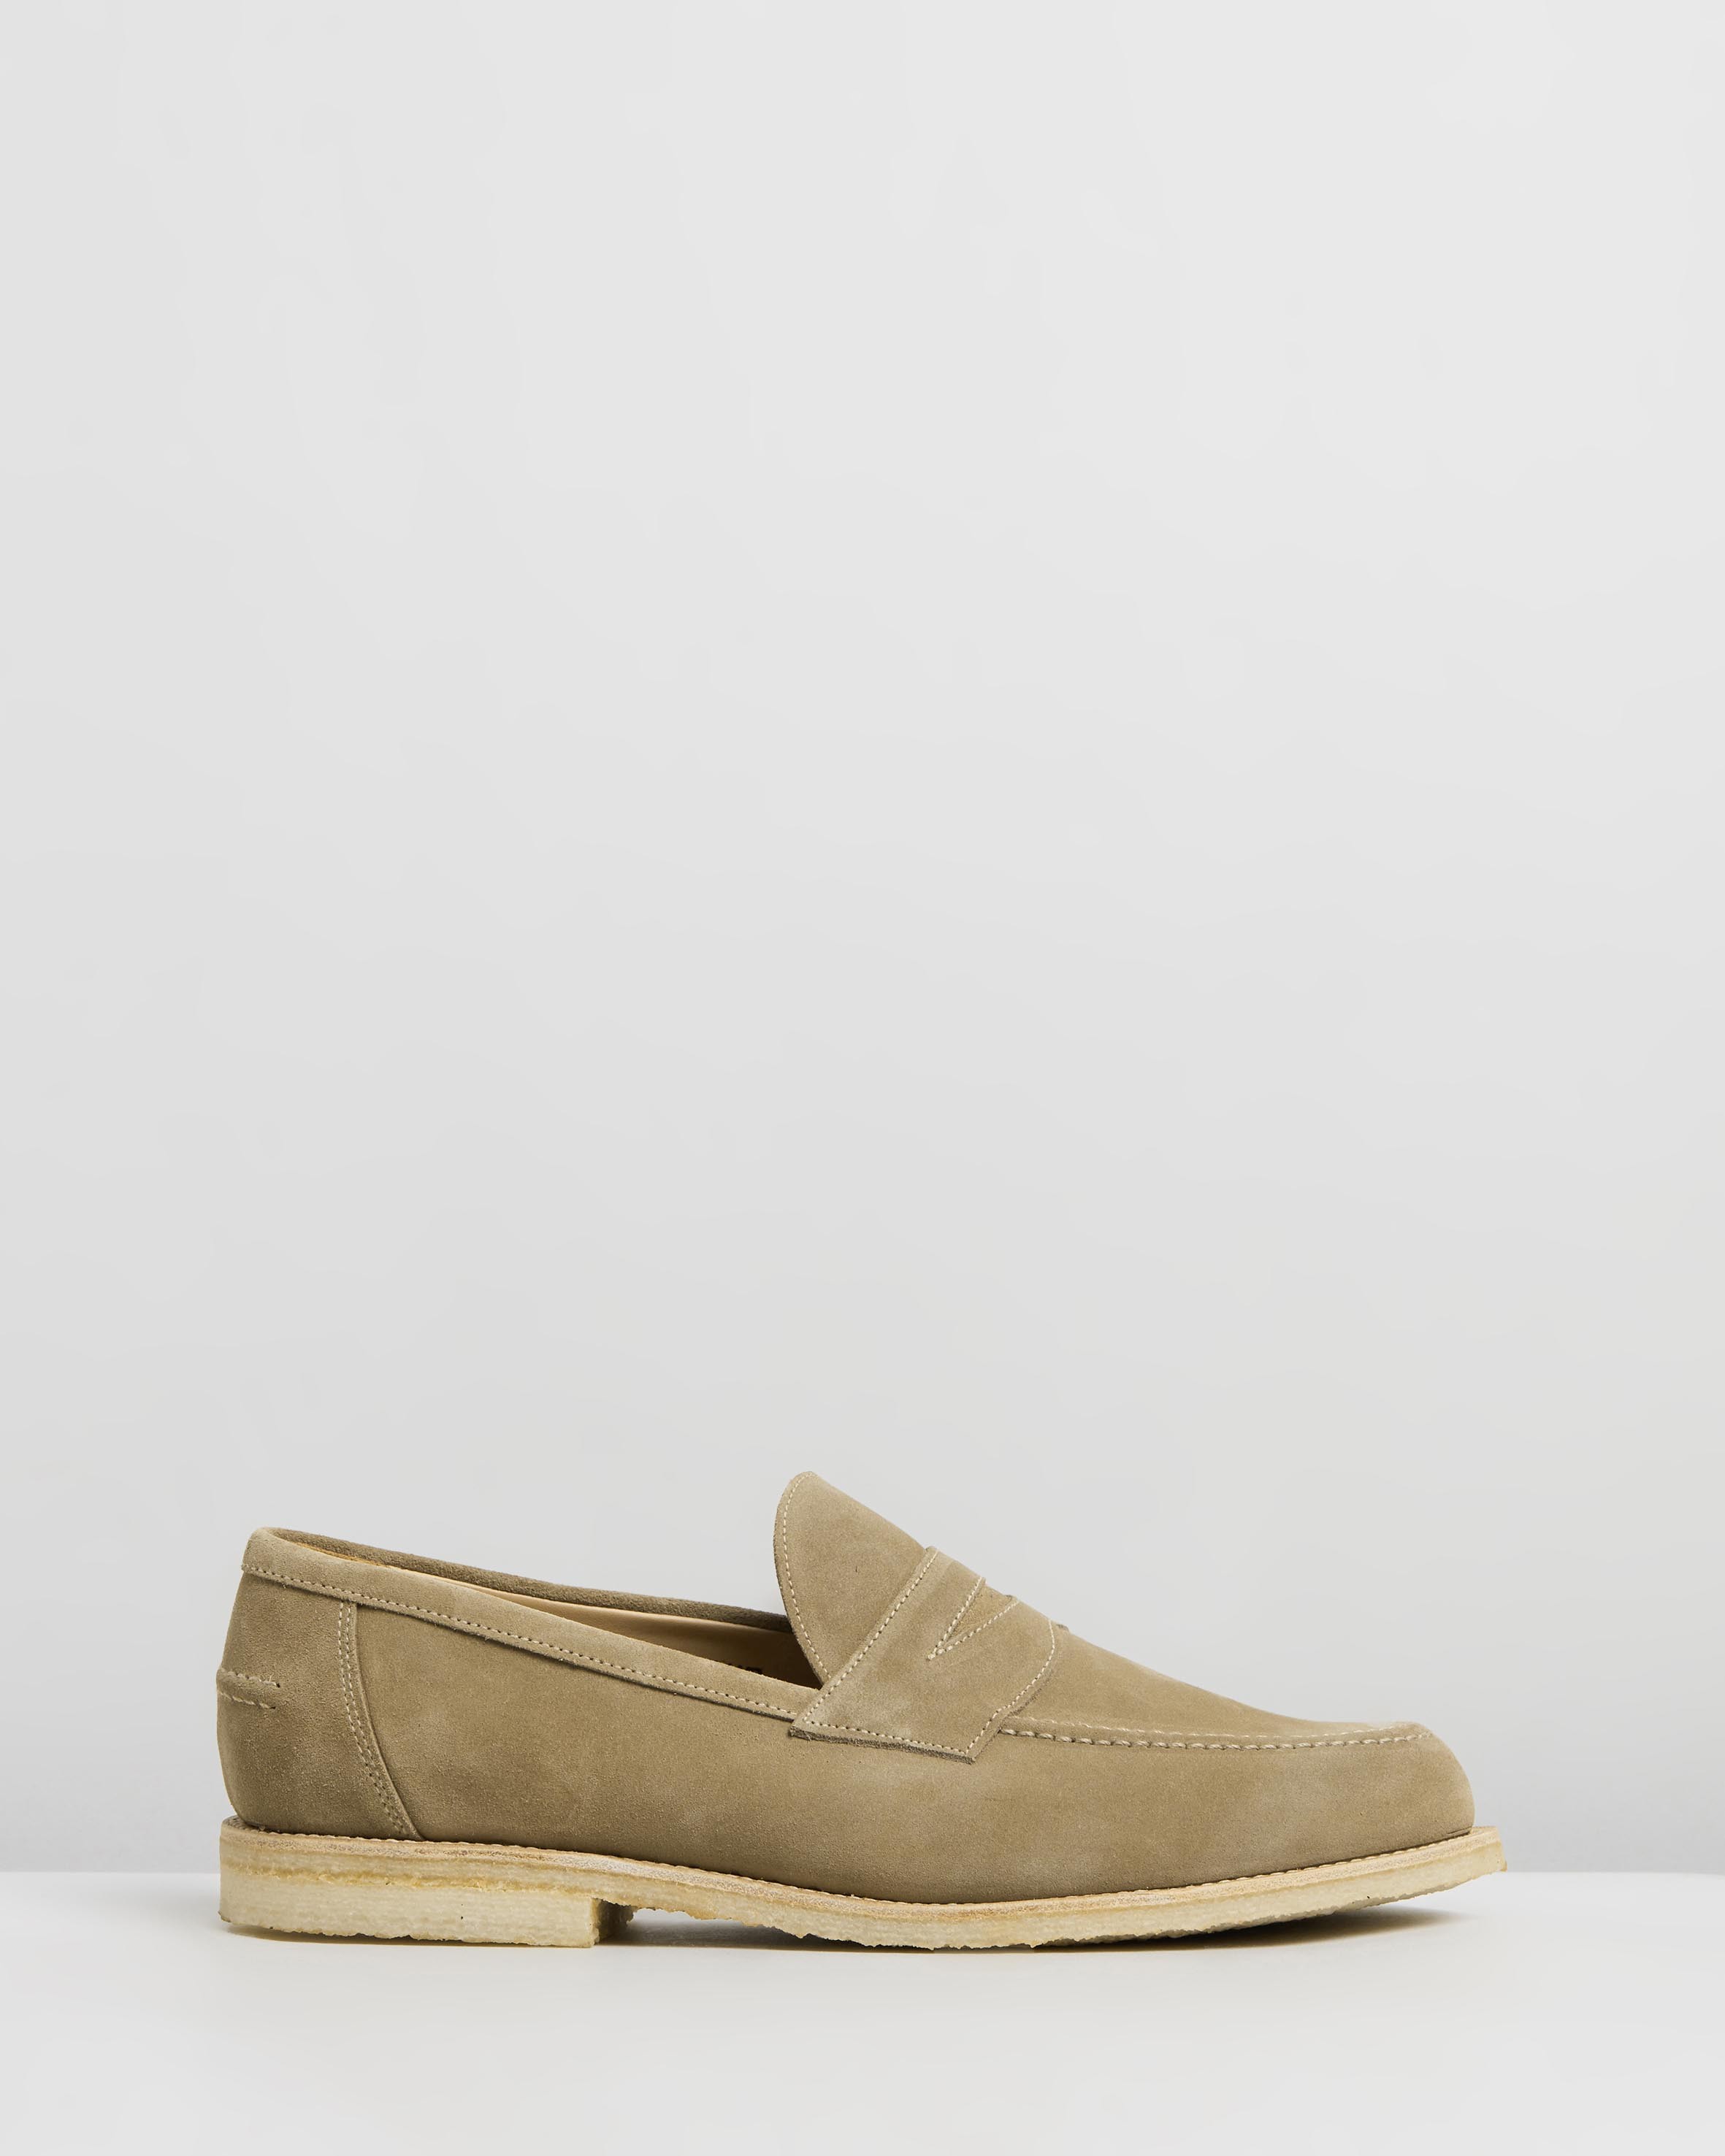 Penny Loafers Dirty Buck Suede by Sanders | ShoeSales